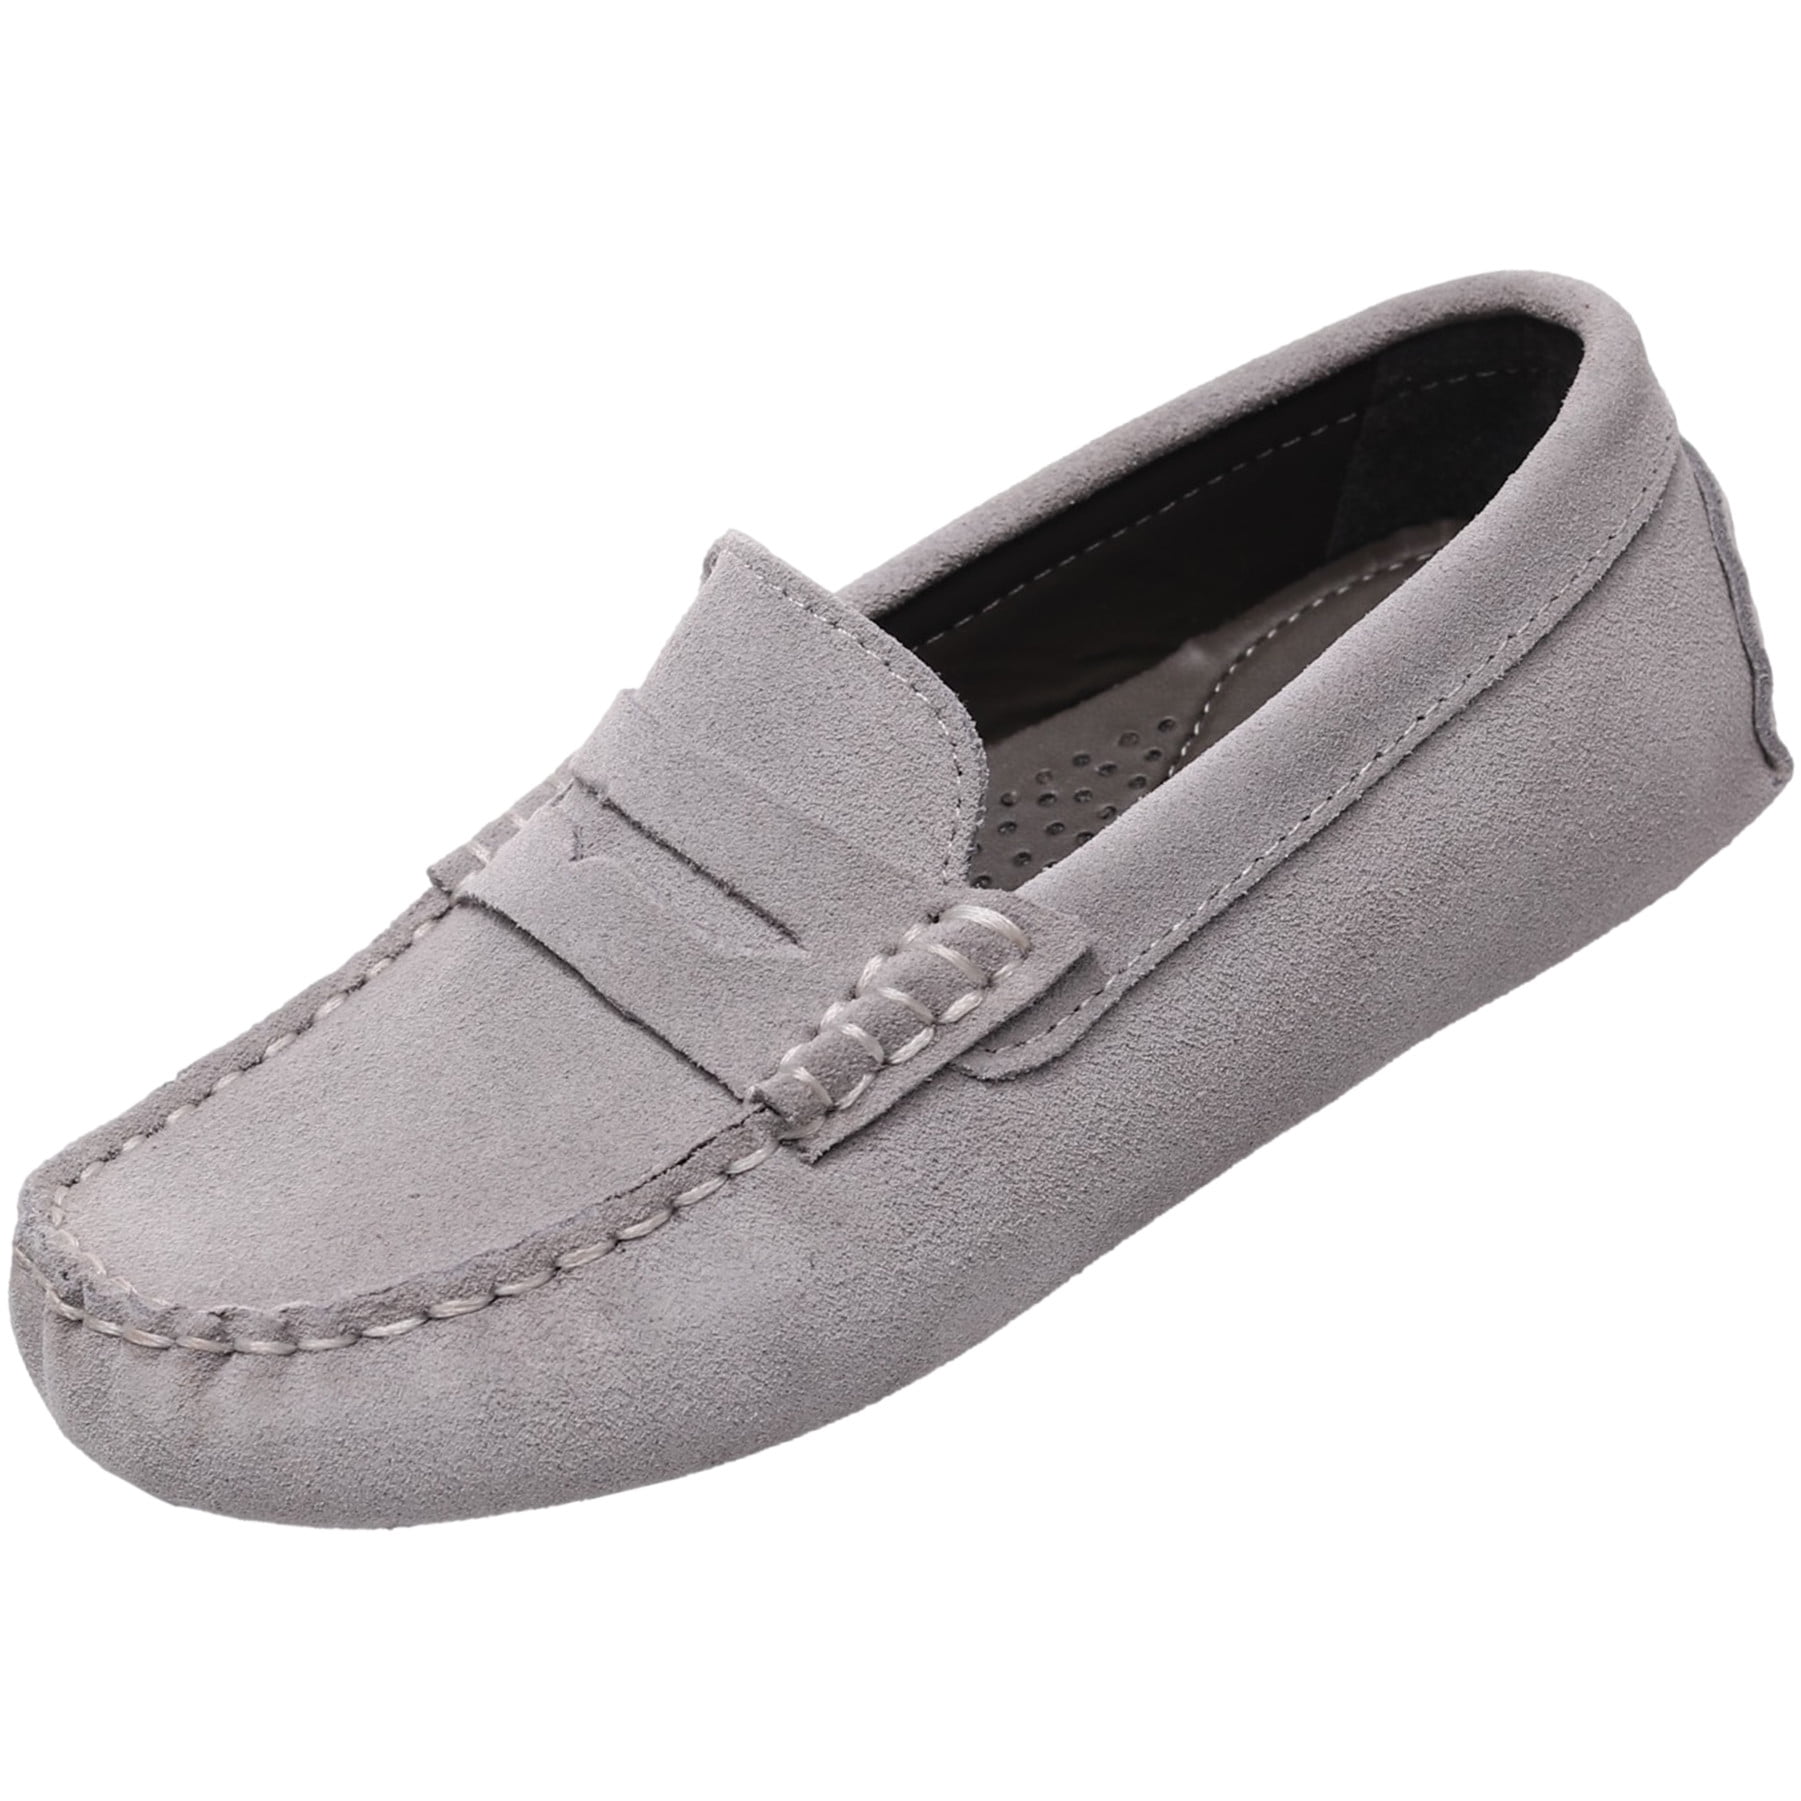 rismart Kids Penny Loafers Boys Girls Casual Flat Boat Shoes Grey 8 Toddler - Walmart.com